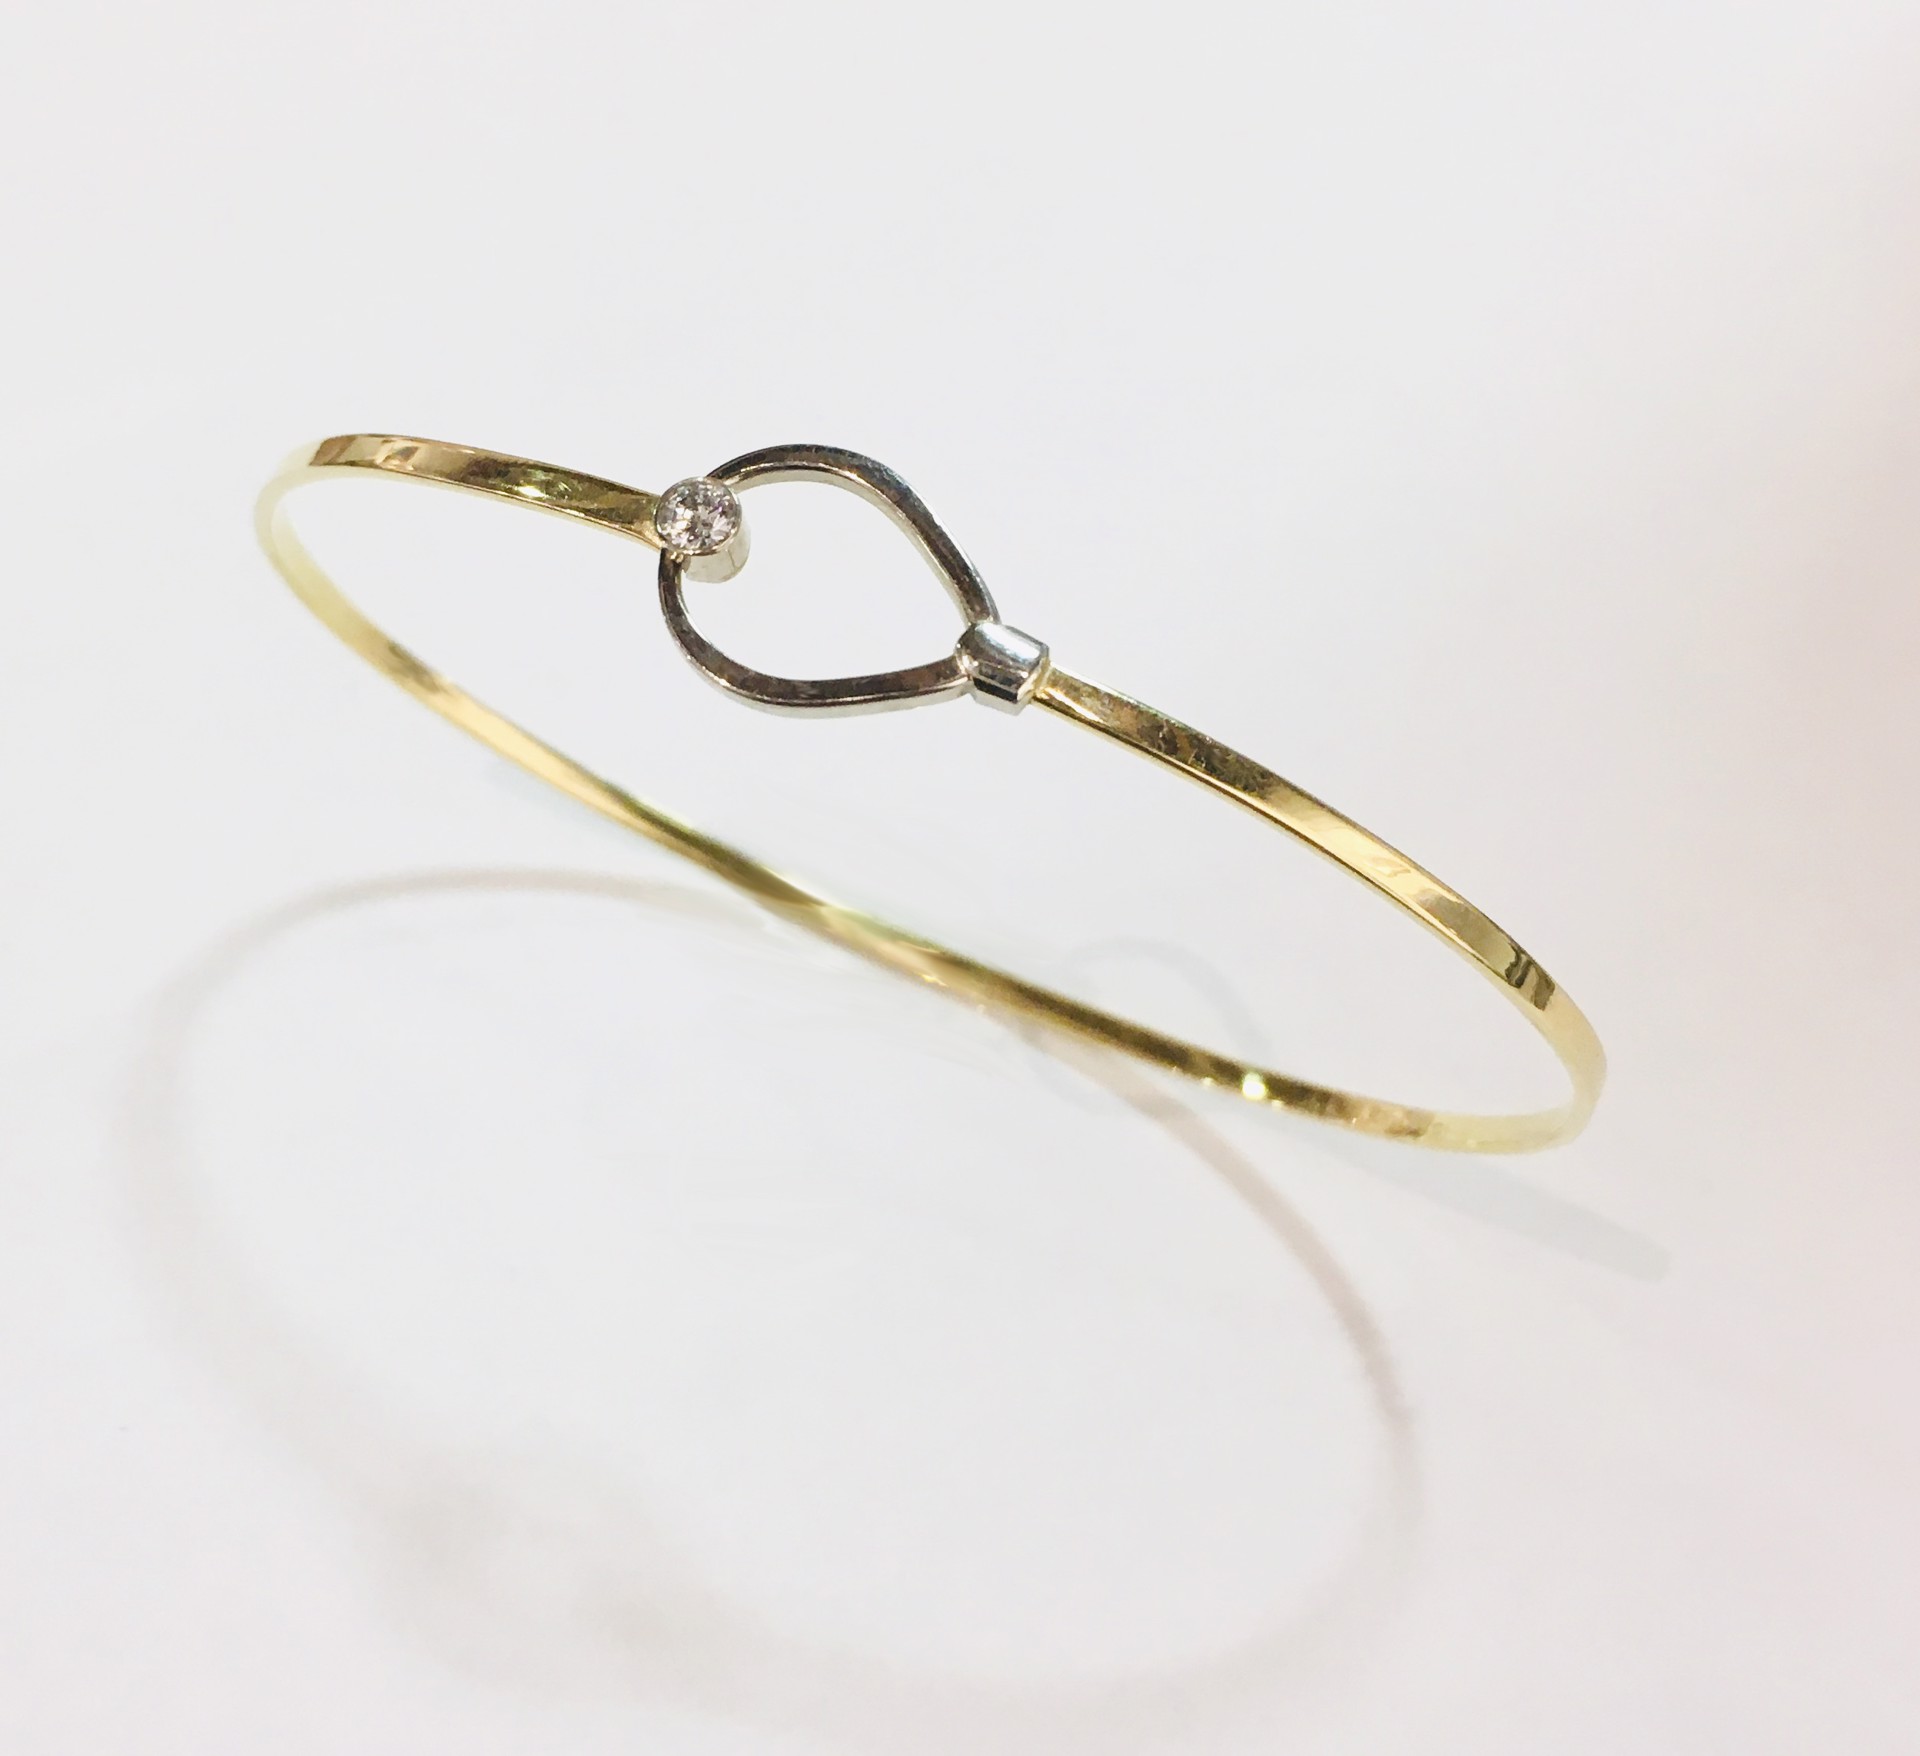 18 & 14K Gold Two Tone Bracelet with Loop Clasp by D'ETTE DELFORGE